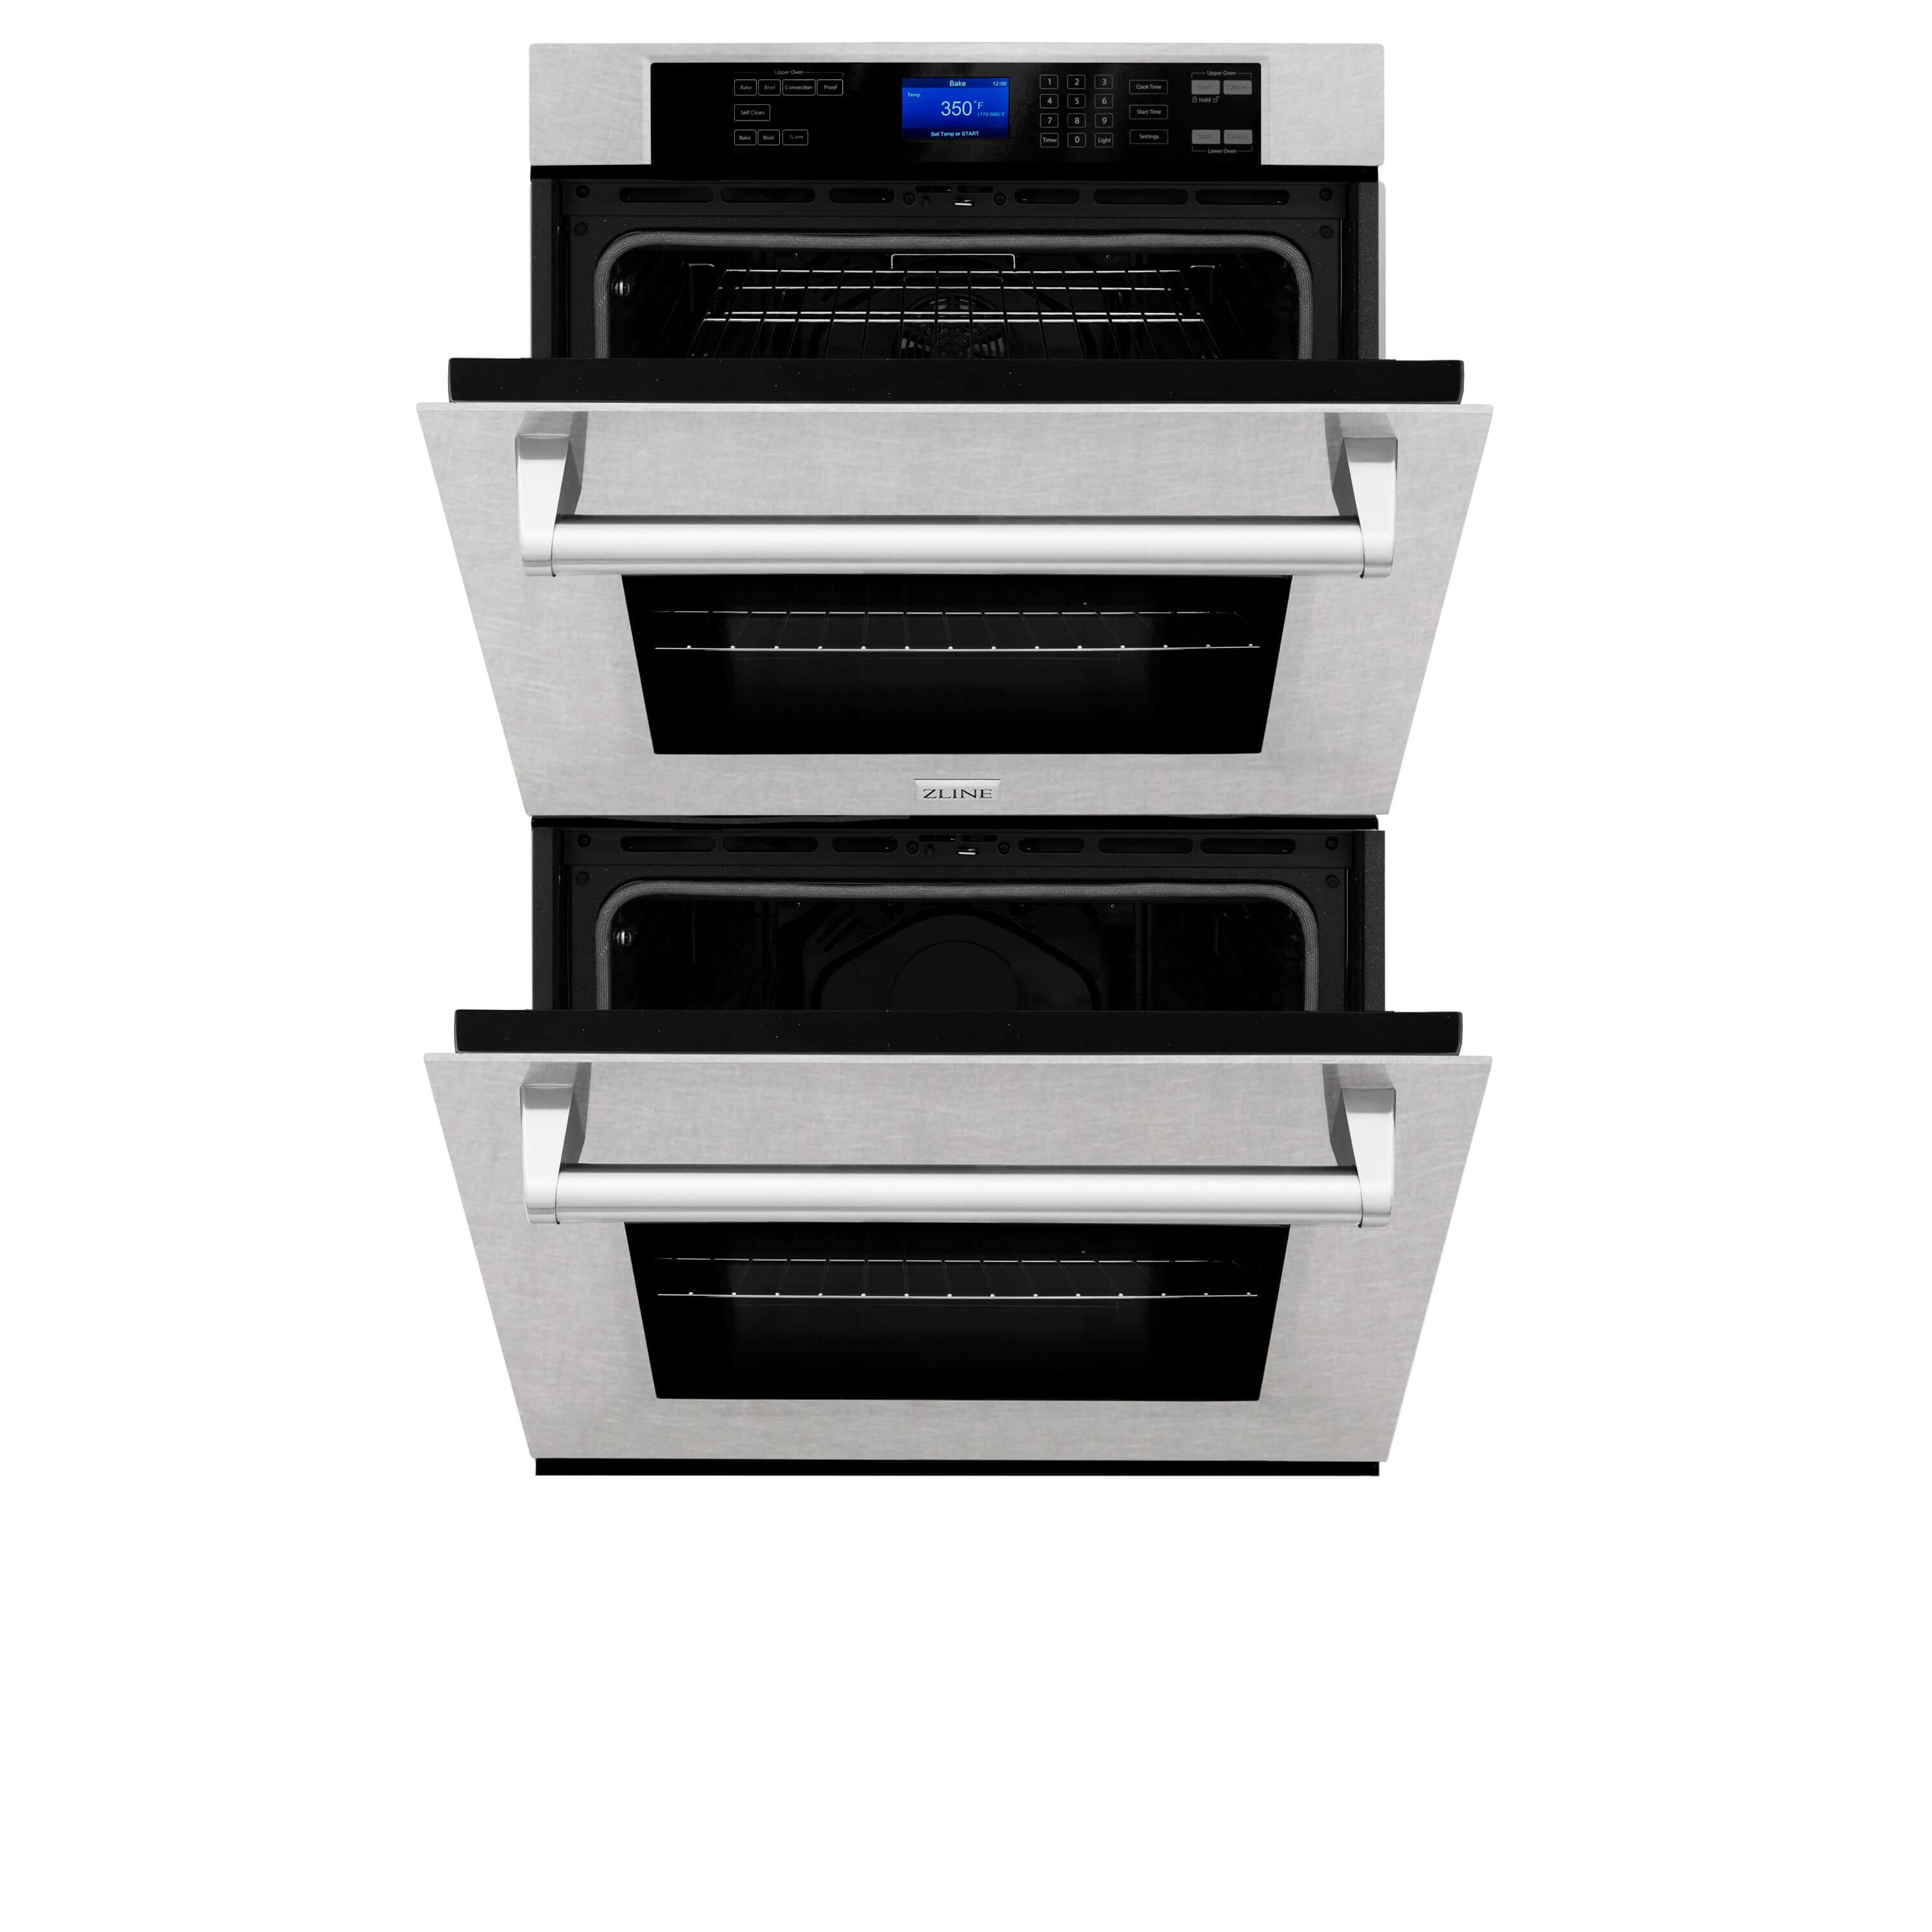 ZLINE 30 in. Professional Electric Double Wall Oven with Self Clean and True Convection in Fingerprint Resistant Stainless Steel (AWDS-30) front, oven half open.